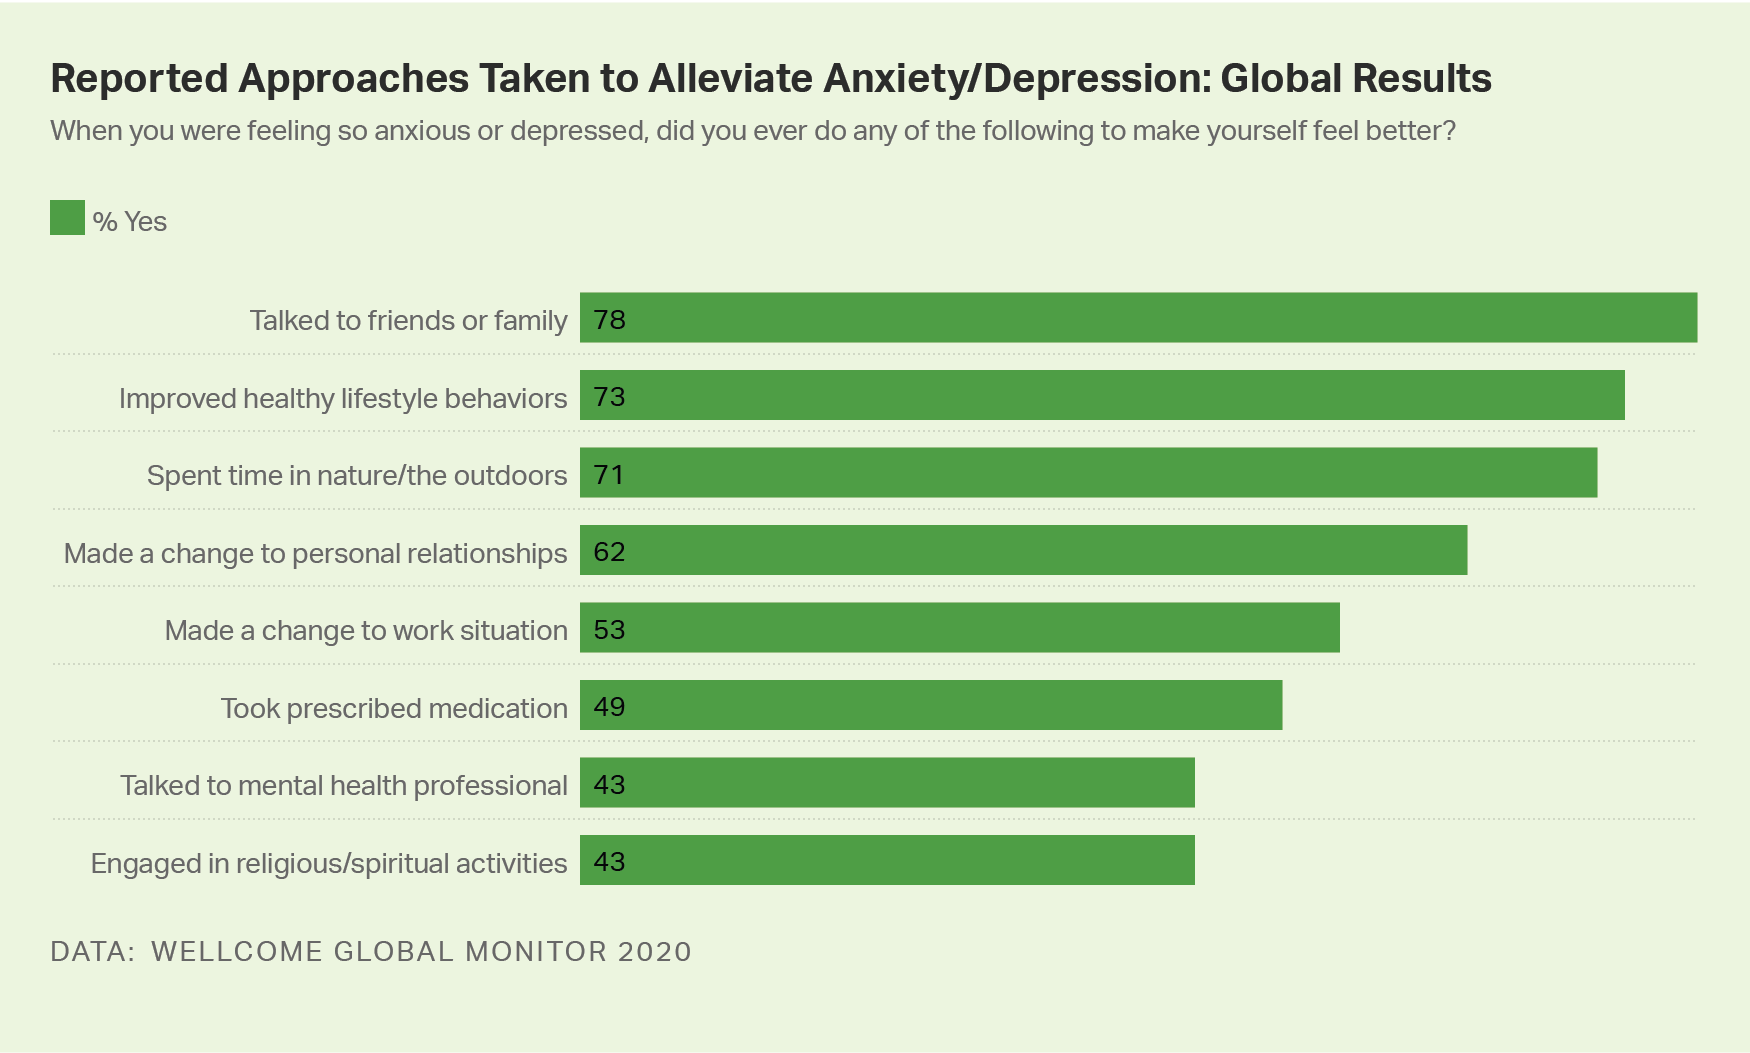 Serious Depression, Anxiety Affect Nearly 4 in 10 Worldwide